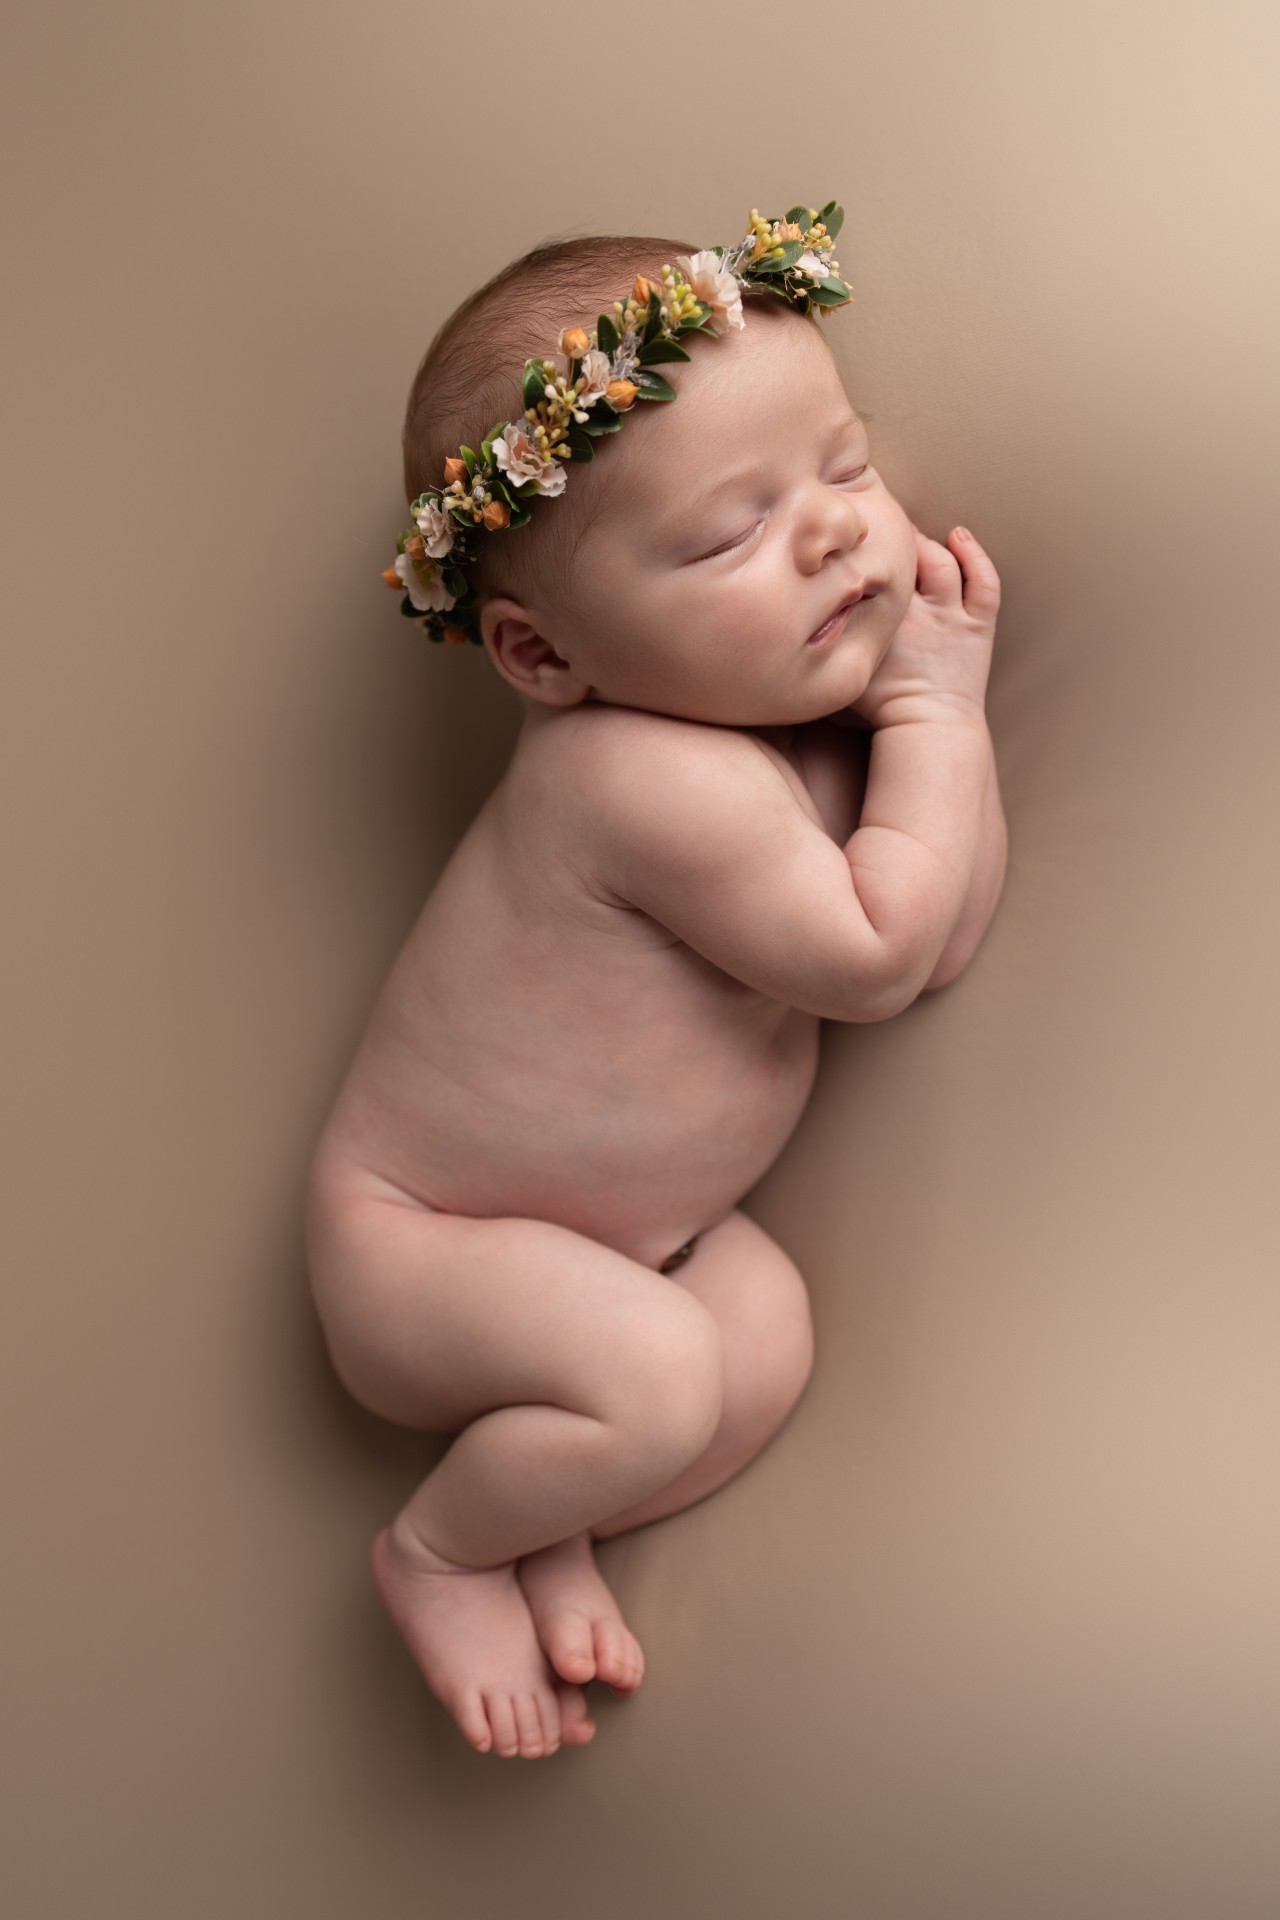 newborn sleeping on the side with floral crown